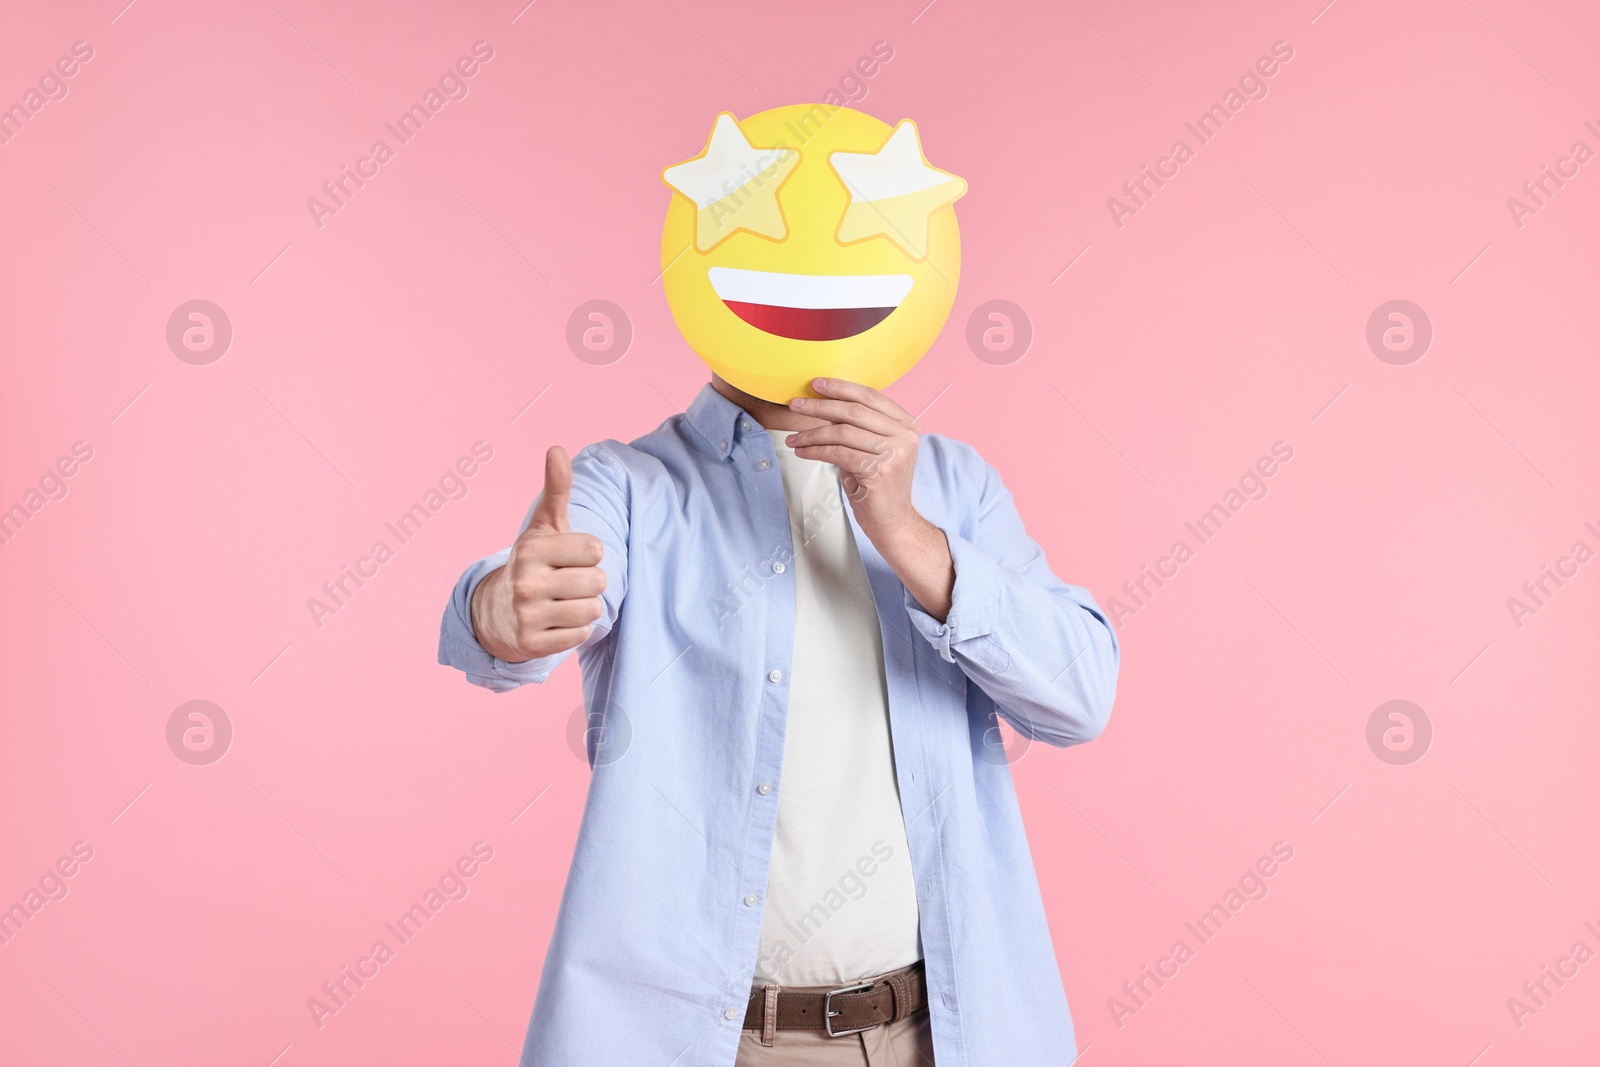 Photo of Man holding emoticon with stars instead of eyes and showing thumb up on pink background